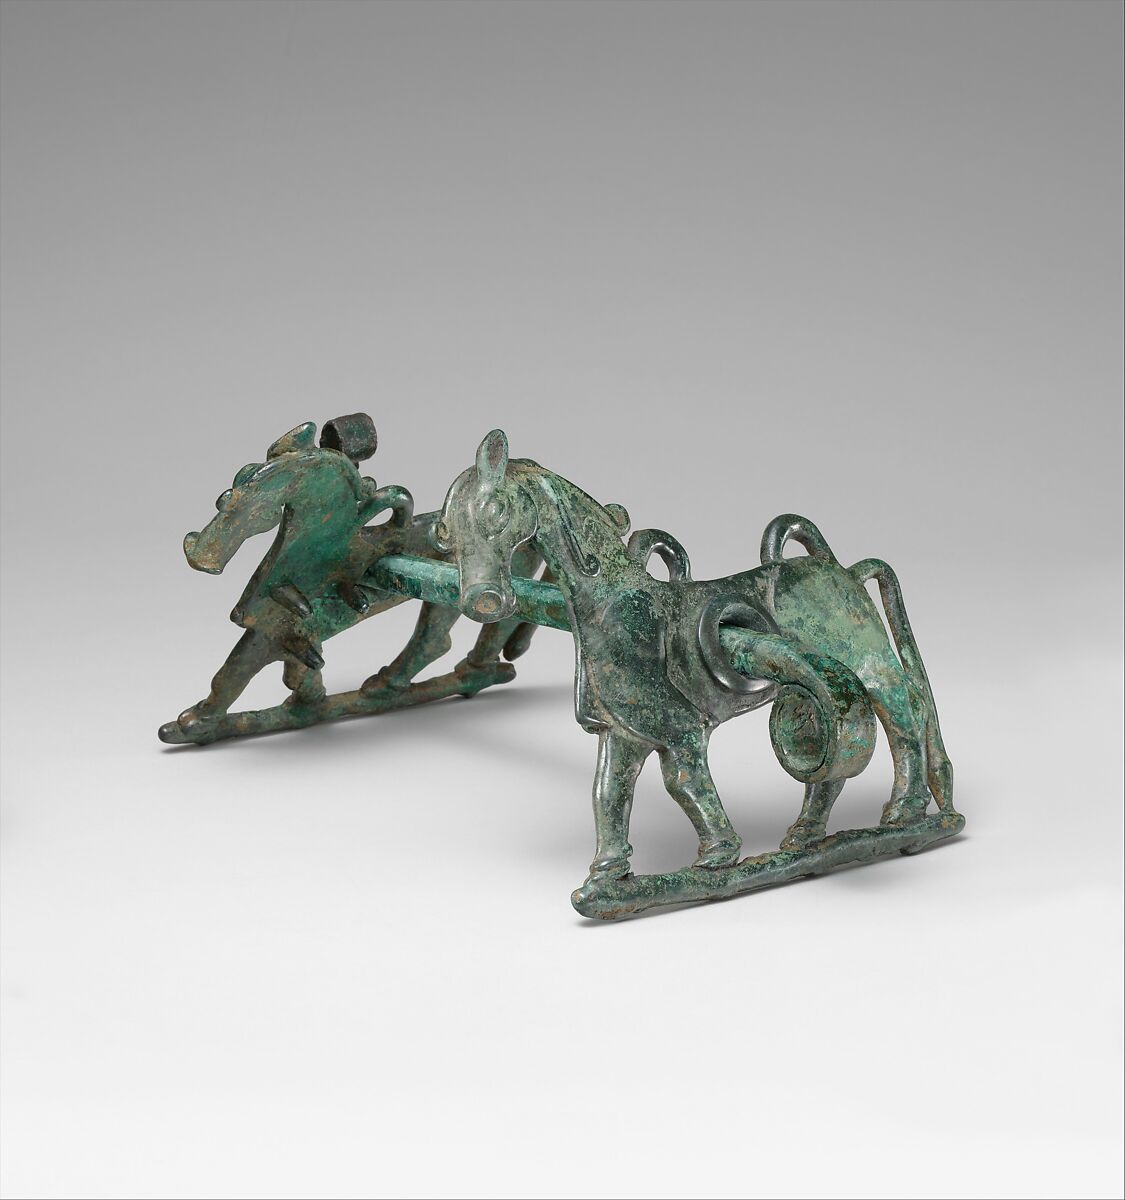 Horse bit with cheekpieces in form of a horse, Bronze, Iran 